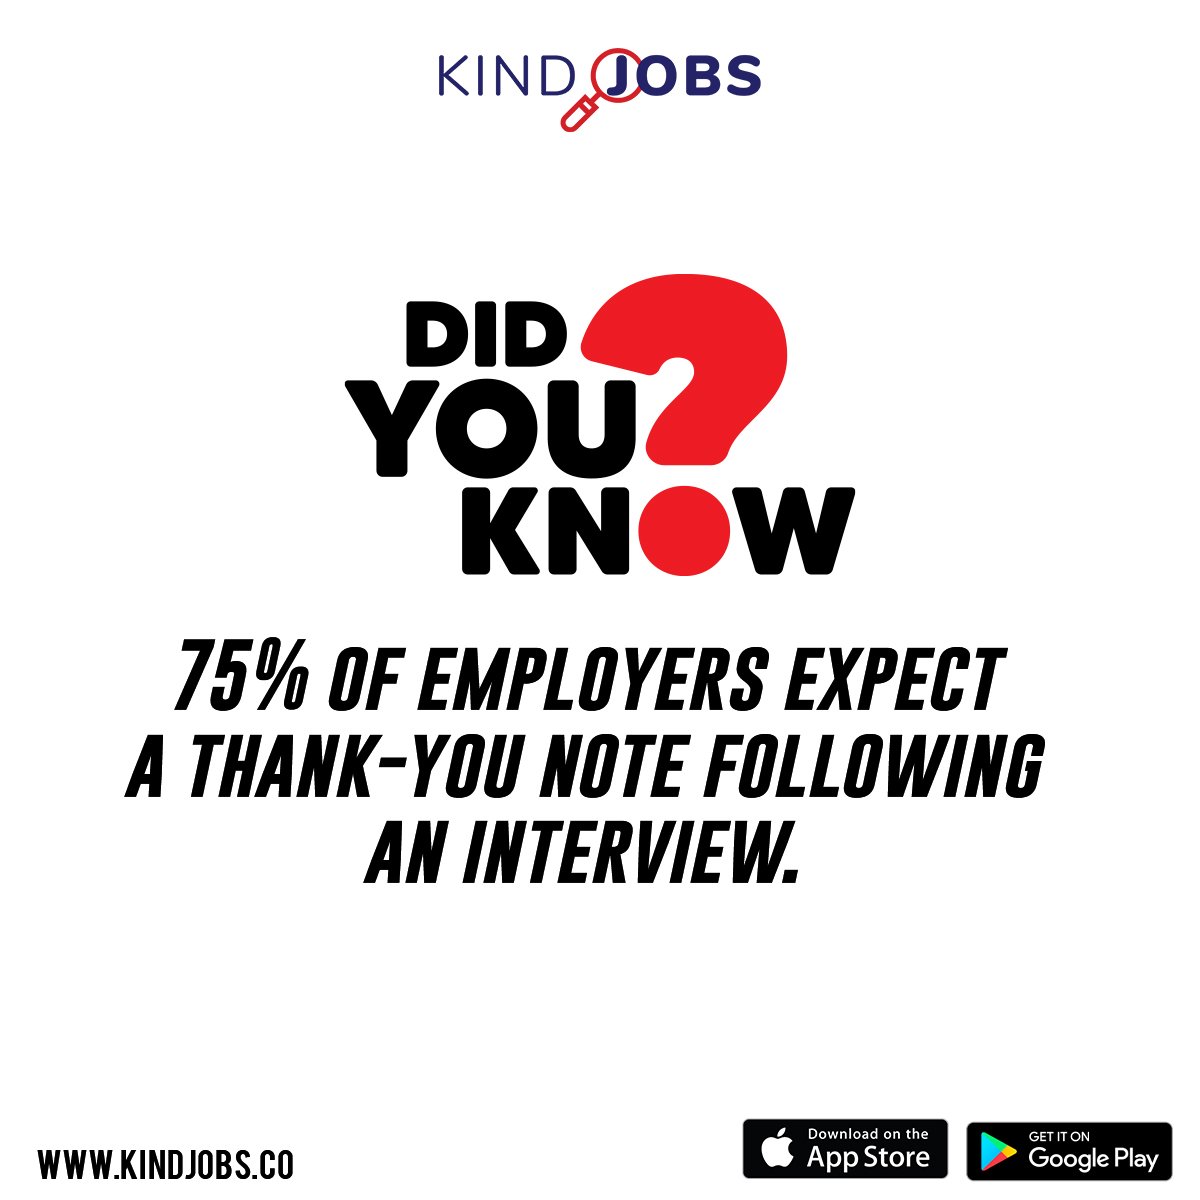 Facts about Employers!
Come and join us @KindJobs
Sign Up Now and Get free job alerts as a welcome bonus!
#kindjobs #freejobalerts #jobalerts #wearehiring #hiring #nowhiring #jobsearch #hiringnow #recruitment #employment #applynow #joinourteam #careers #jobvacancy #work #jobopen